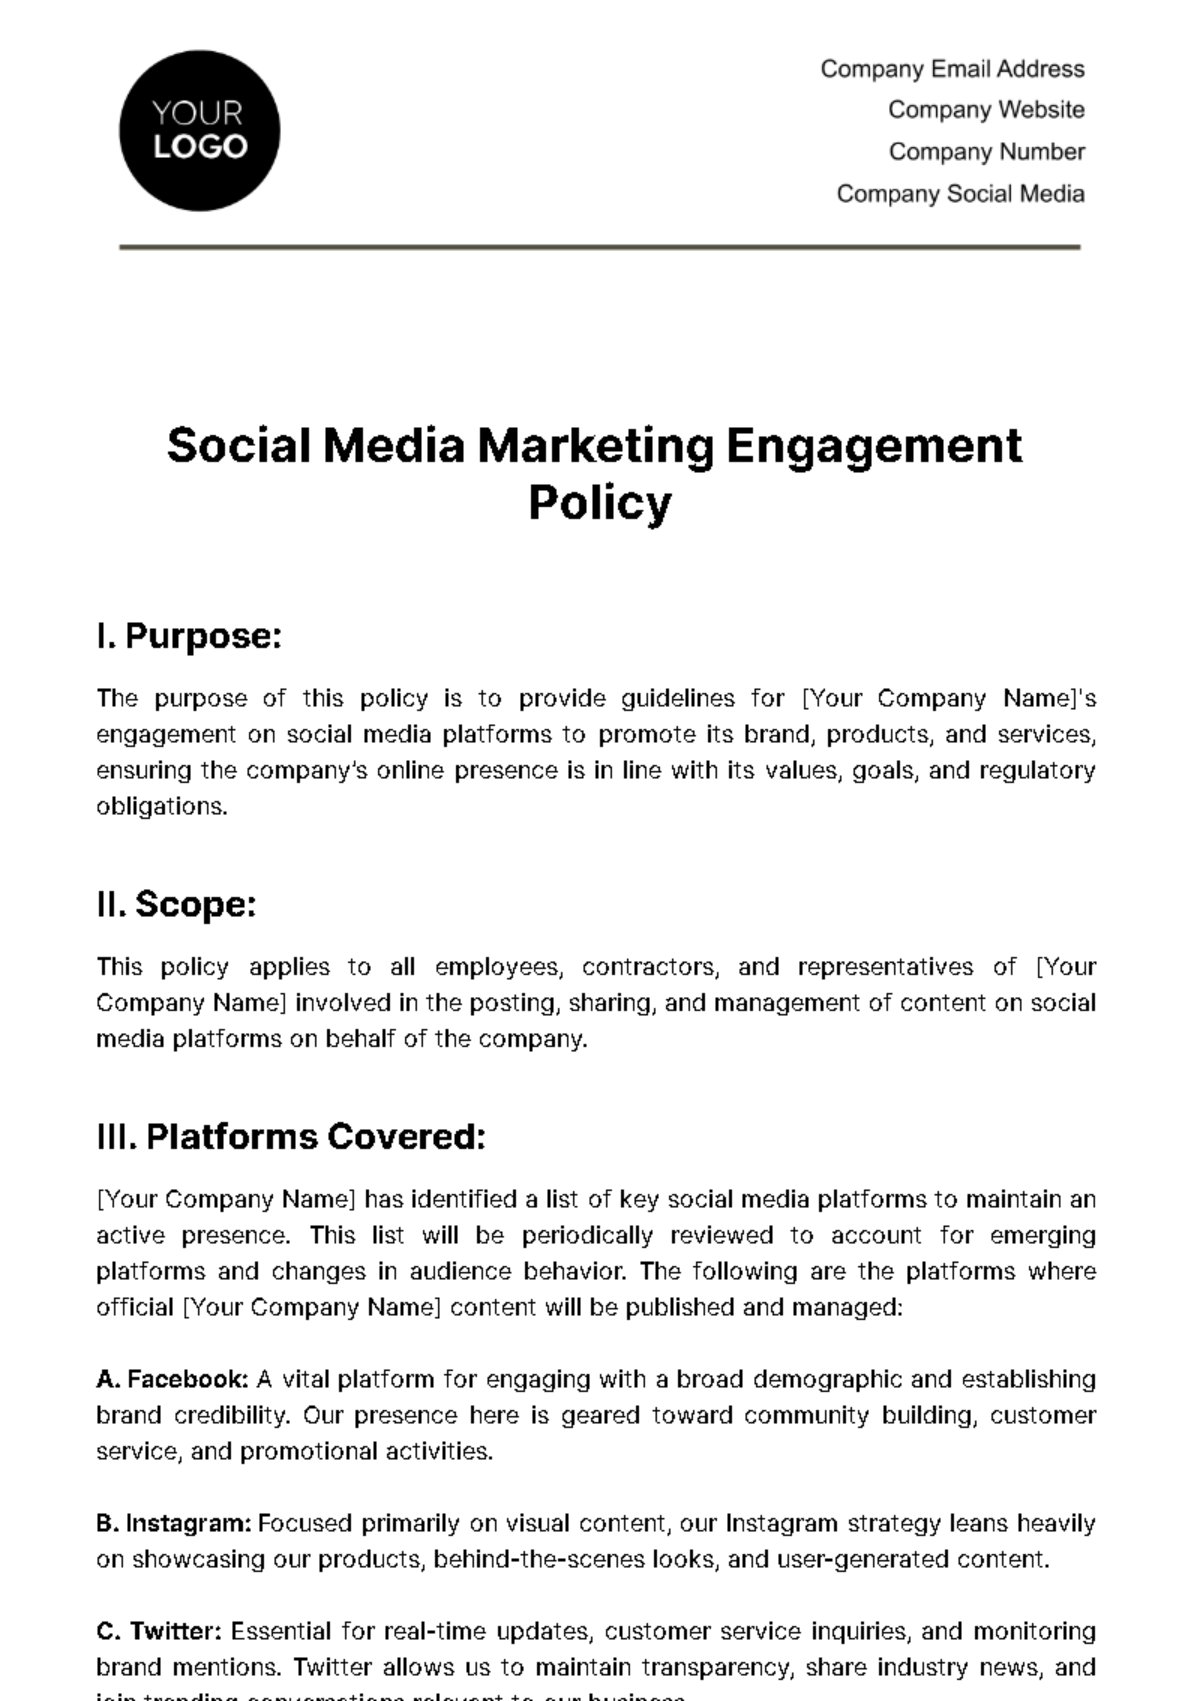 Social Media Marketing Engagement Policy Template